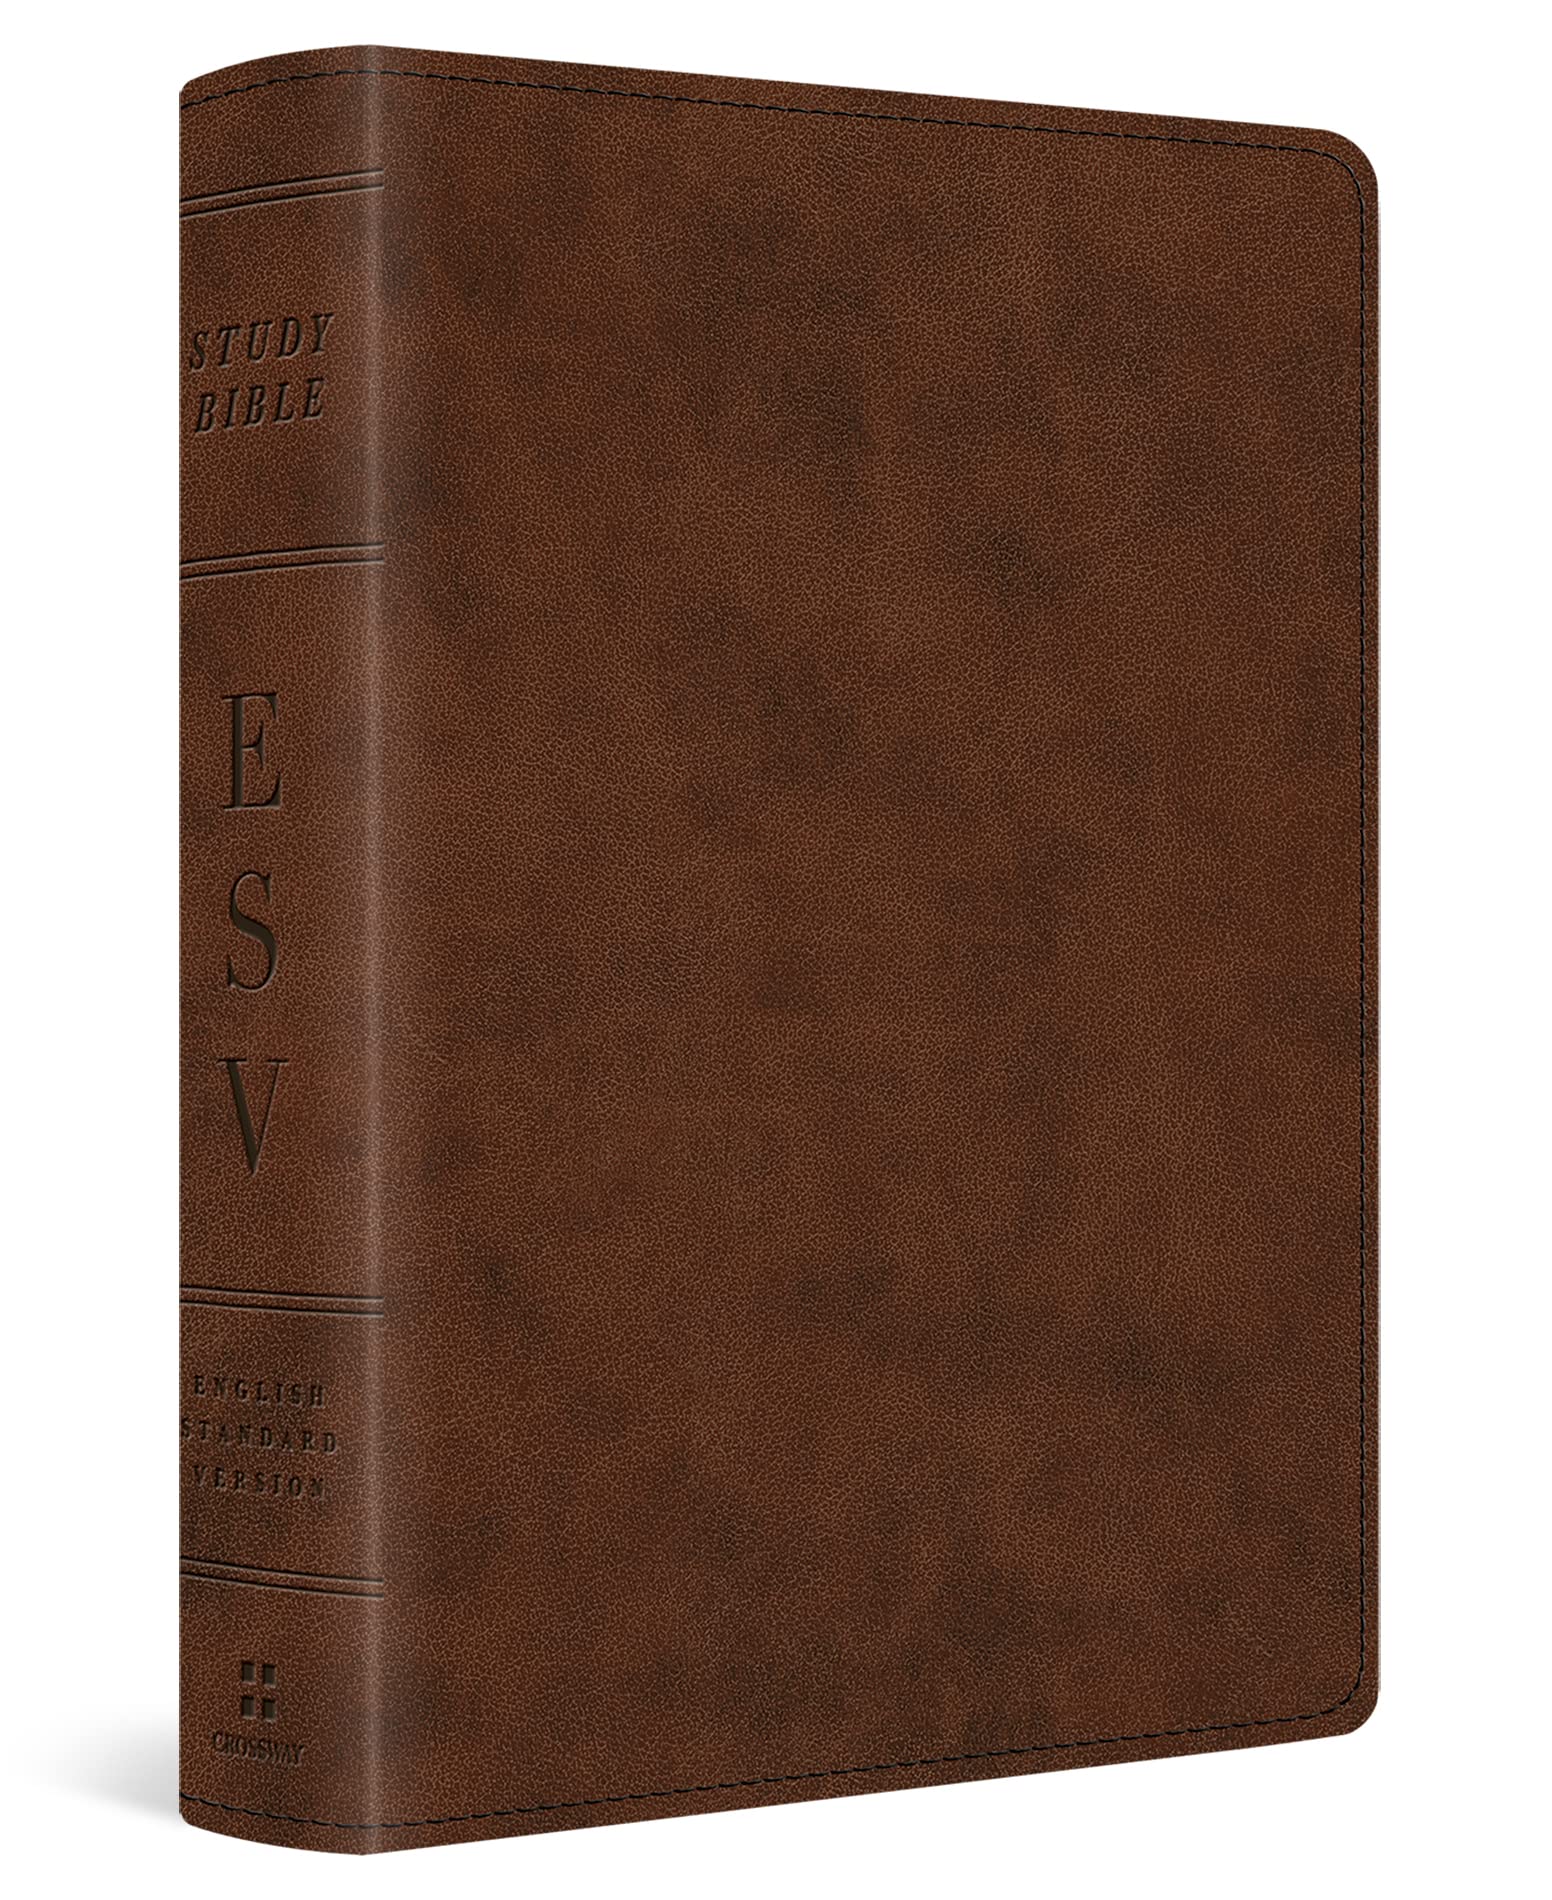 Study Bible-ESV-Personal Size by Crossway Bibles